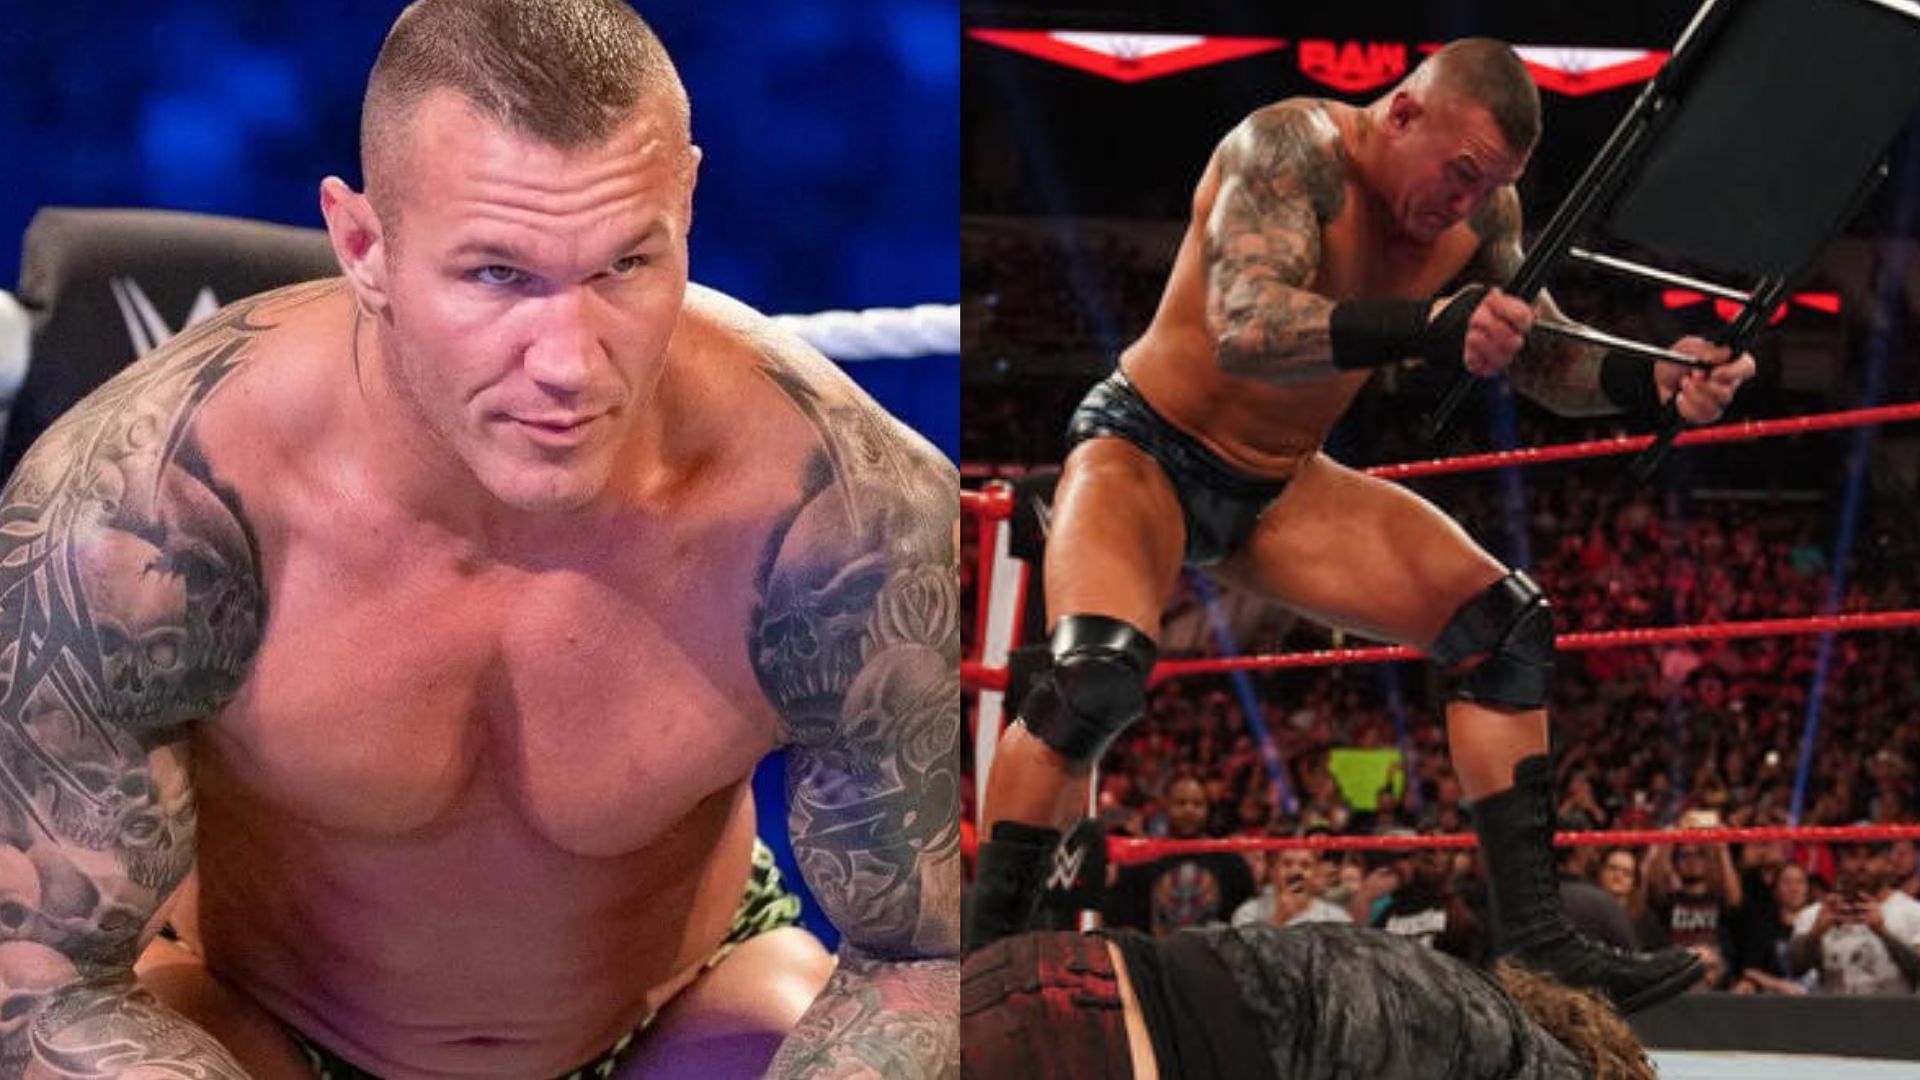 Randy Orton has made a lot of enemies in WWE, including this Hall of Famer